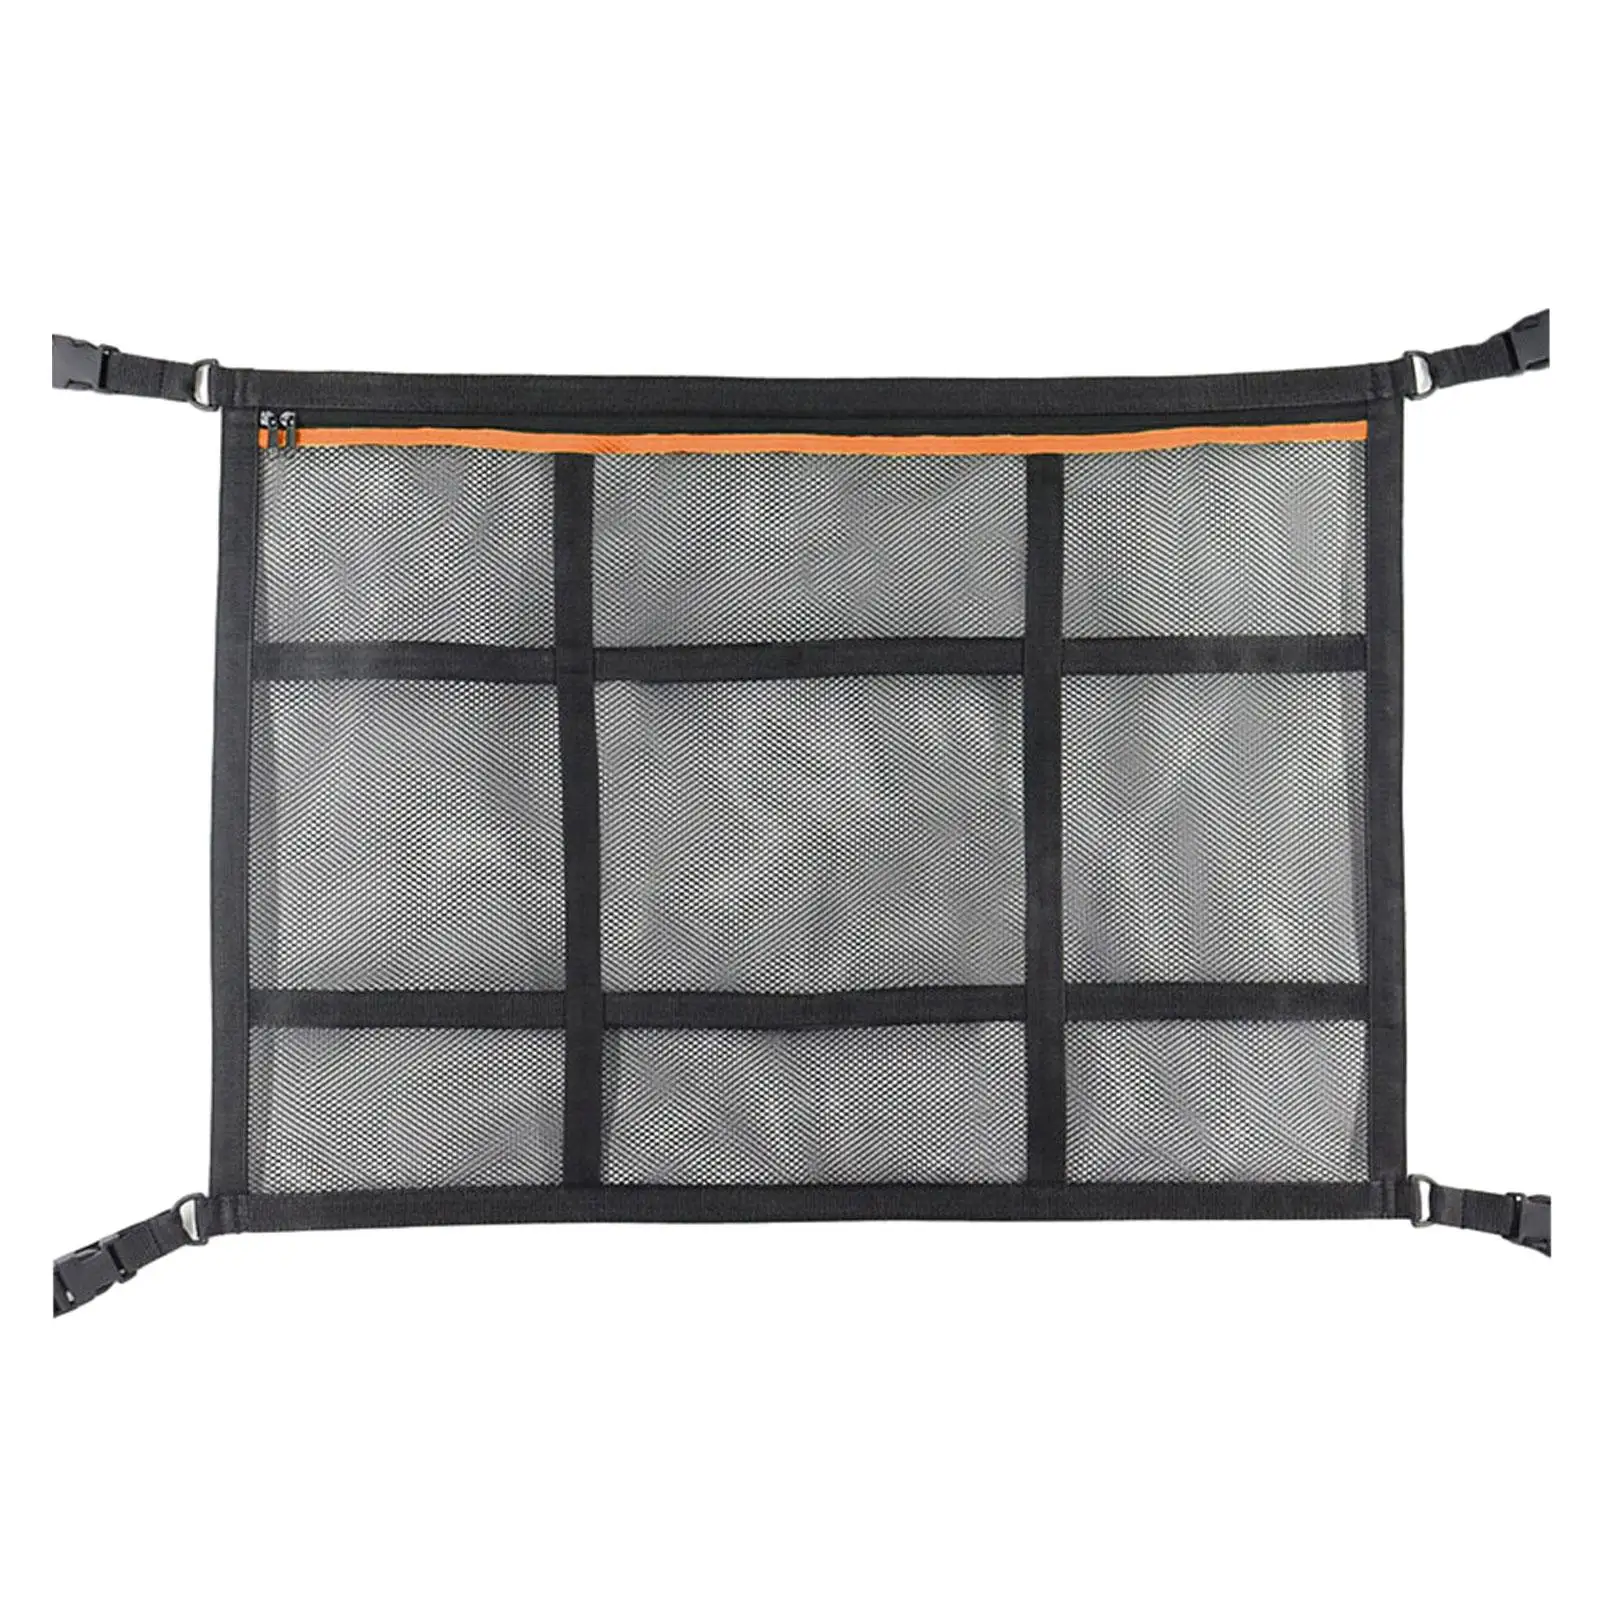 Car Ceiling Cargo Net Pocket Easy Installation Storing Tents Quilts Toys Sundries Droop Less for Travel Long Road Trip SUV